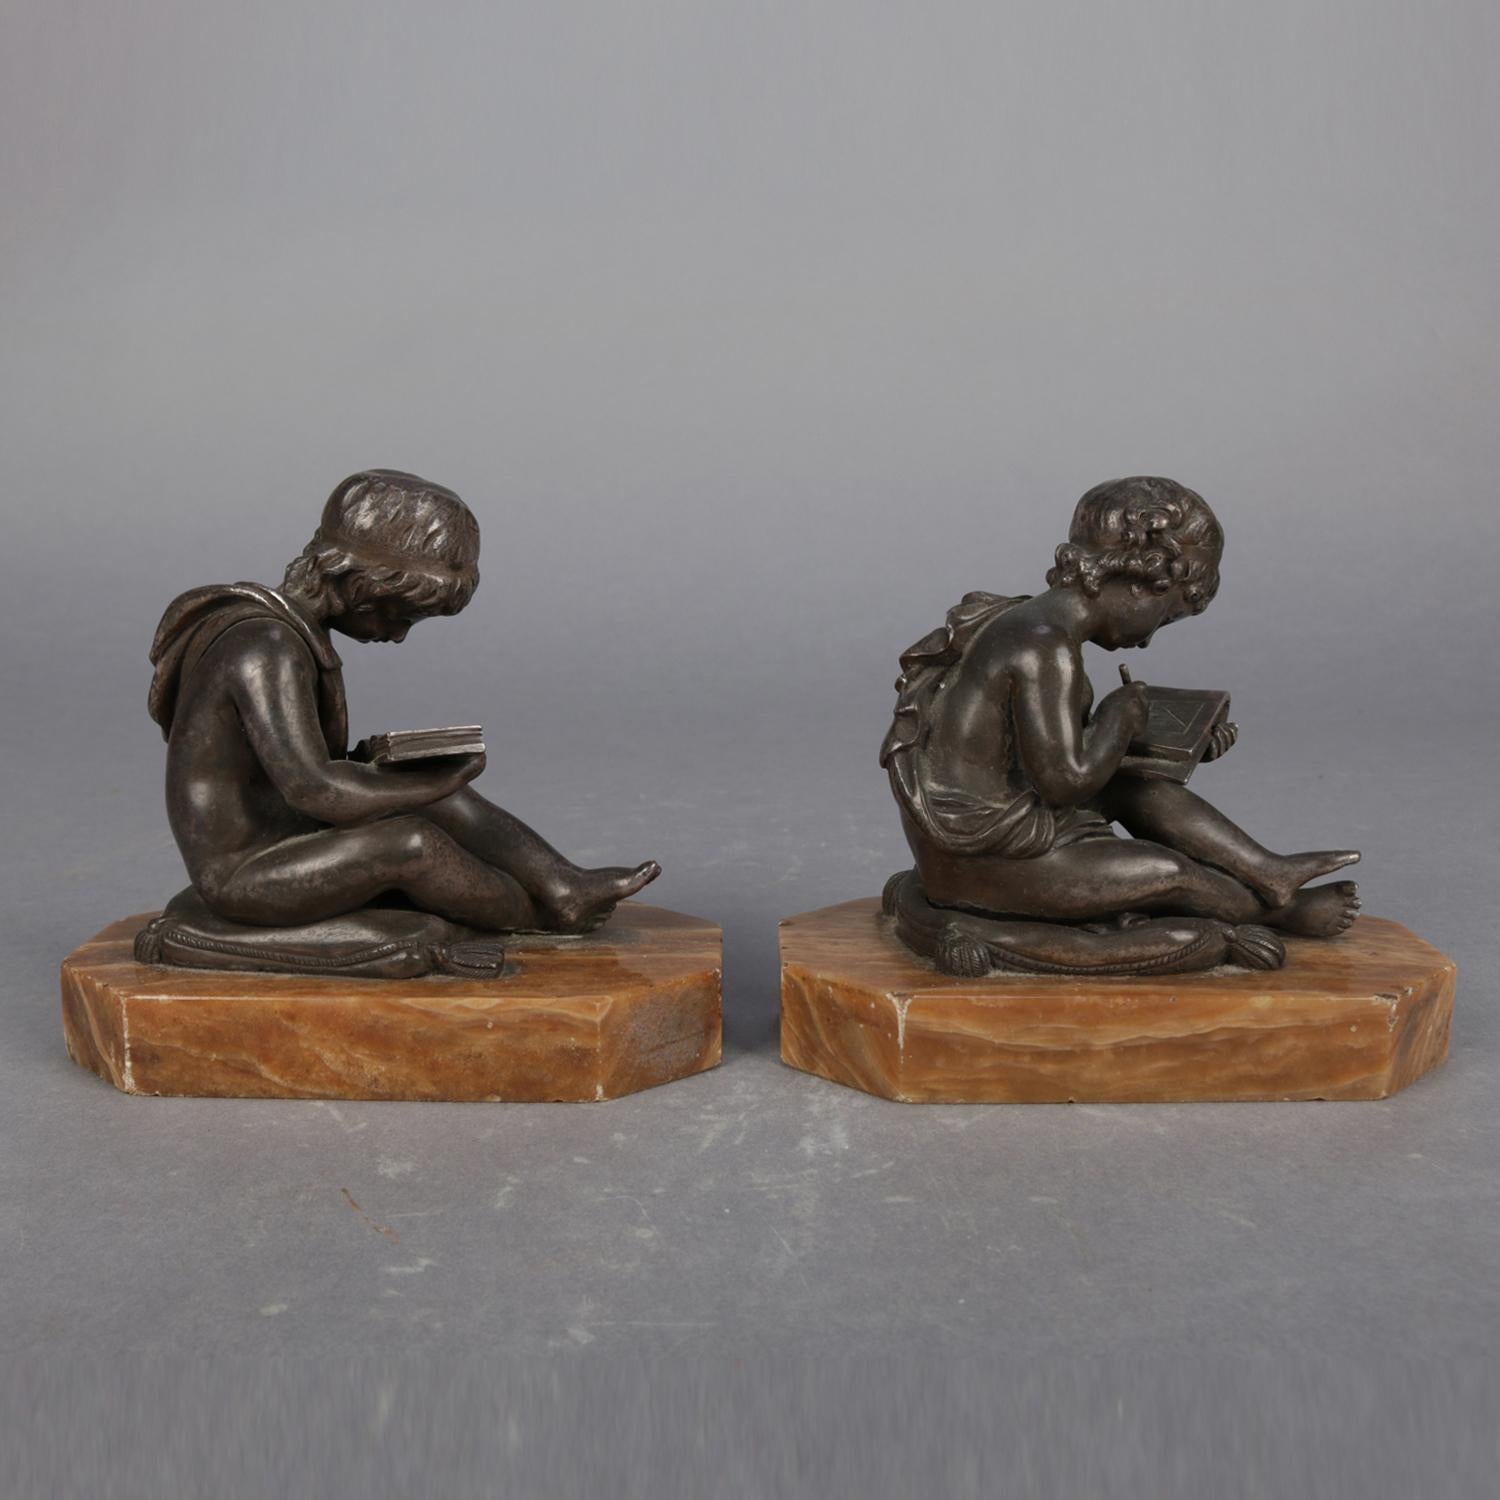 Art Deco Antique French Bronze Sculpture Bookends after Charles Lemire, circa 1910